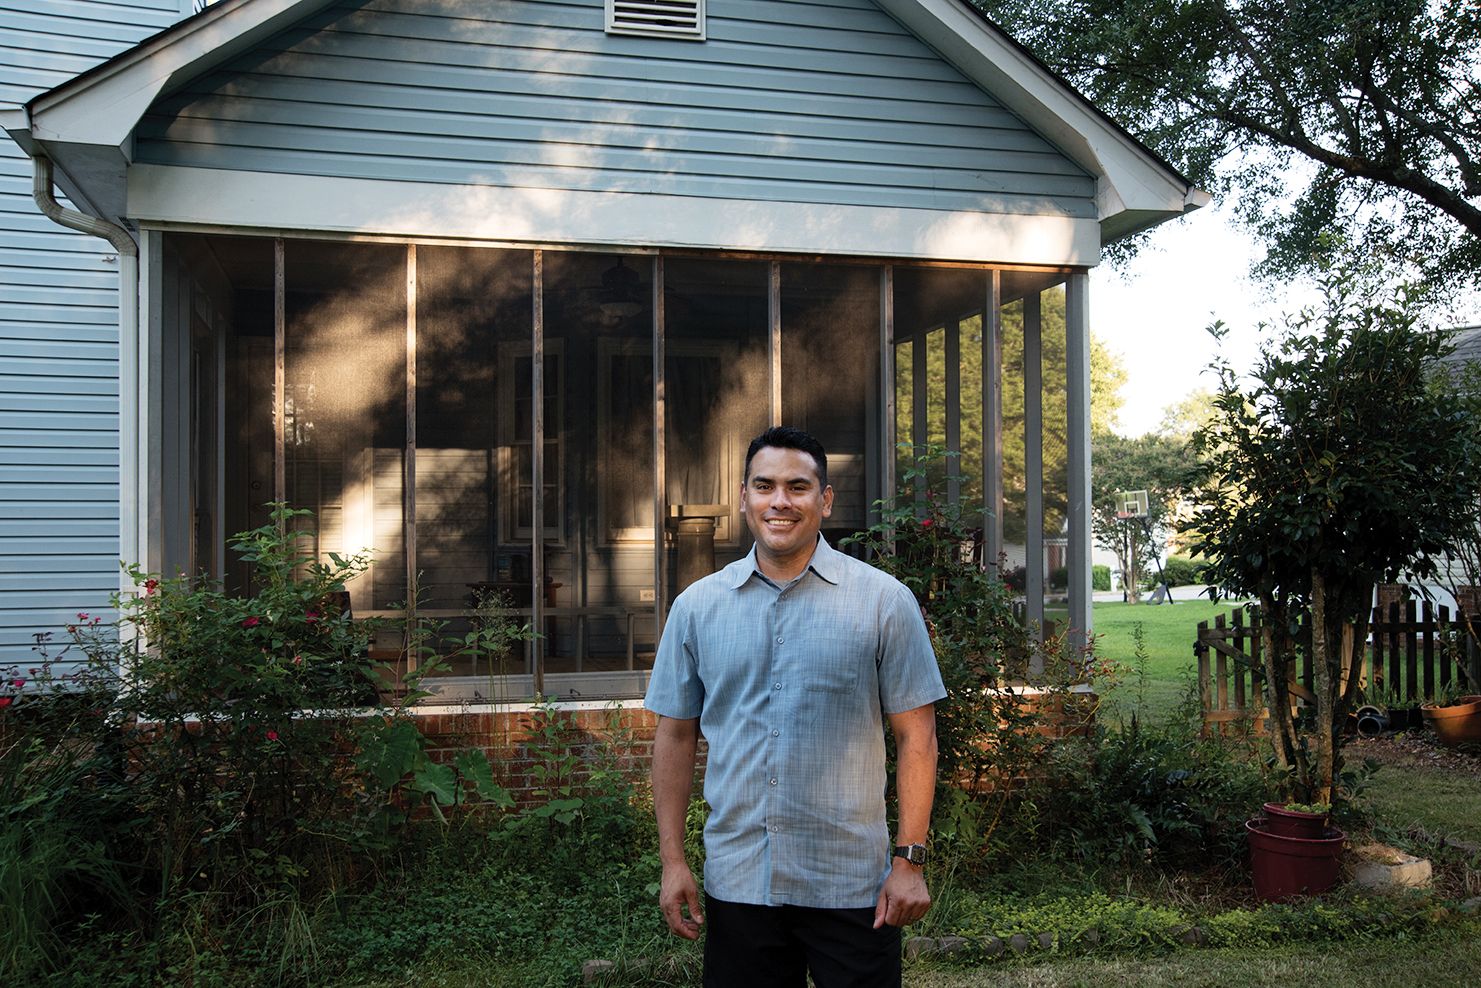 Manuel Gonzalez studied mechatronics, a new field combining mechanics and electronics, but found it too slow-paced and is now an apprentice machinist. (4 of 10)